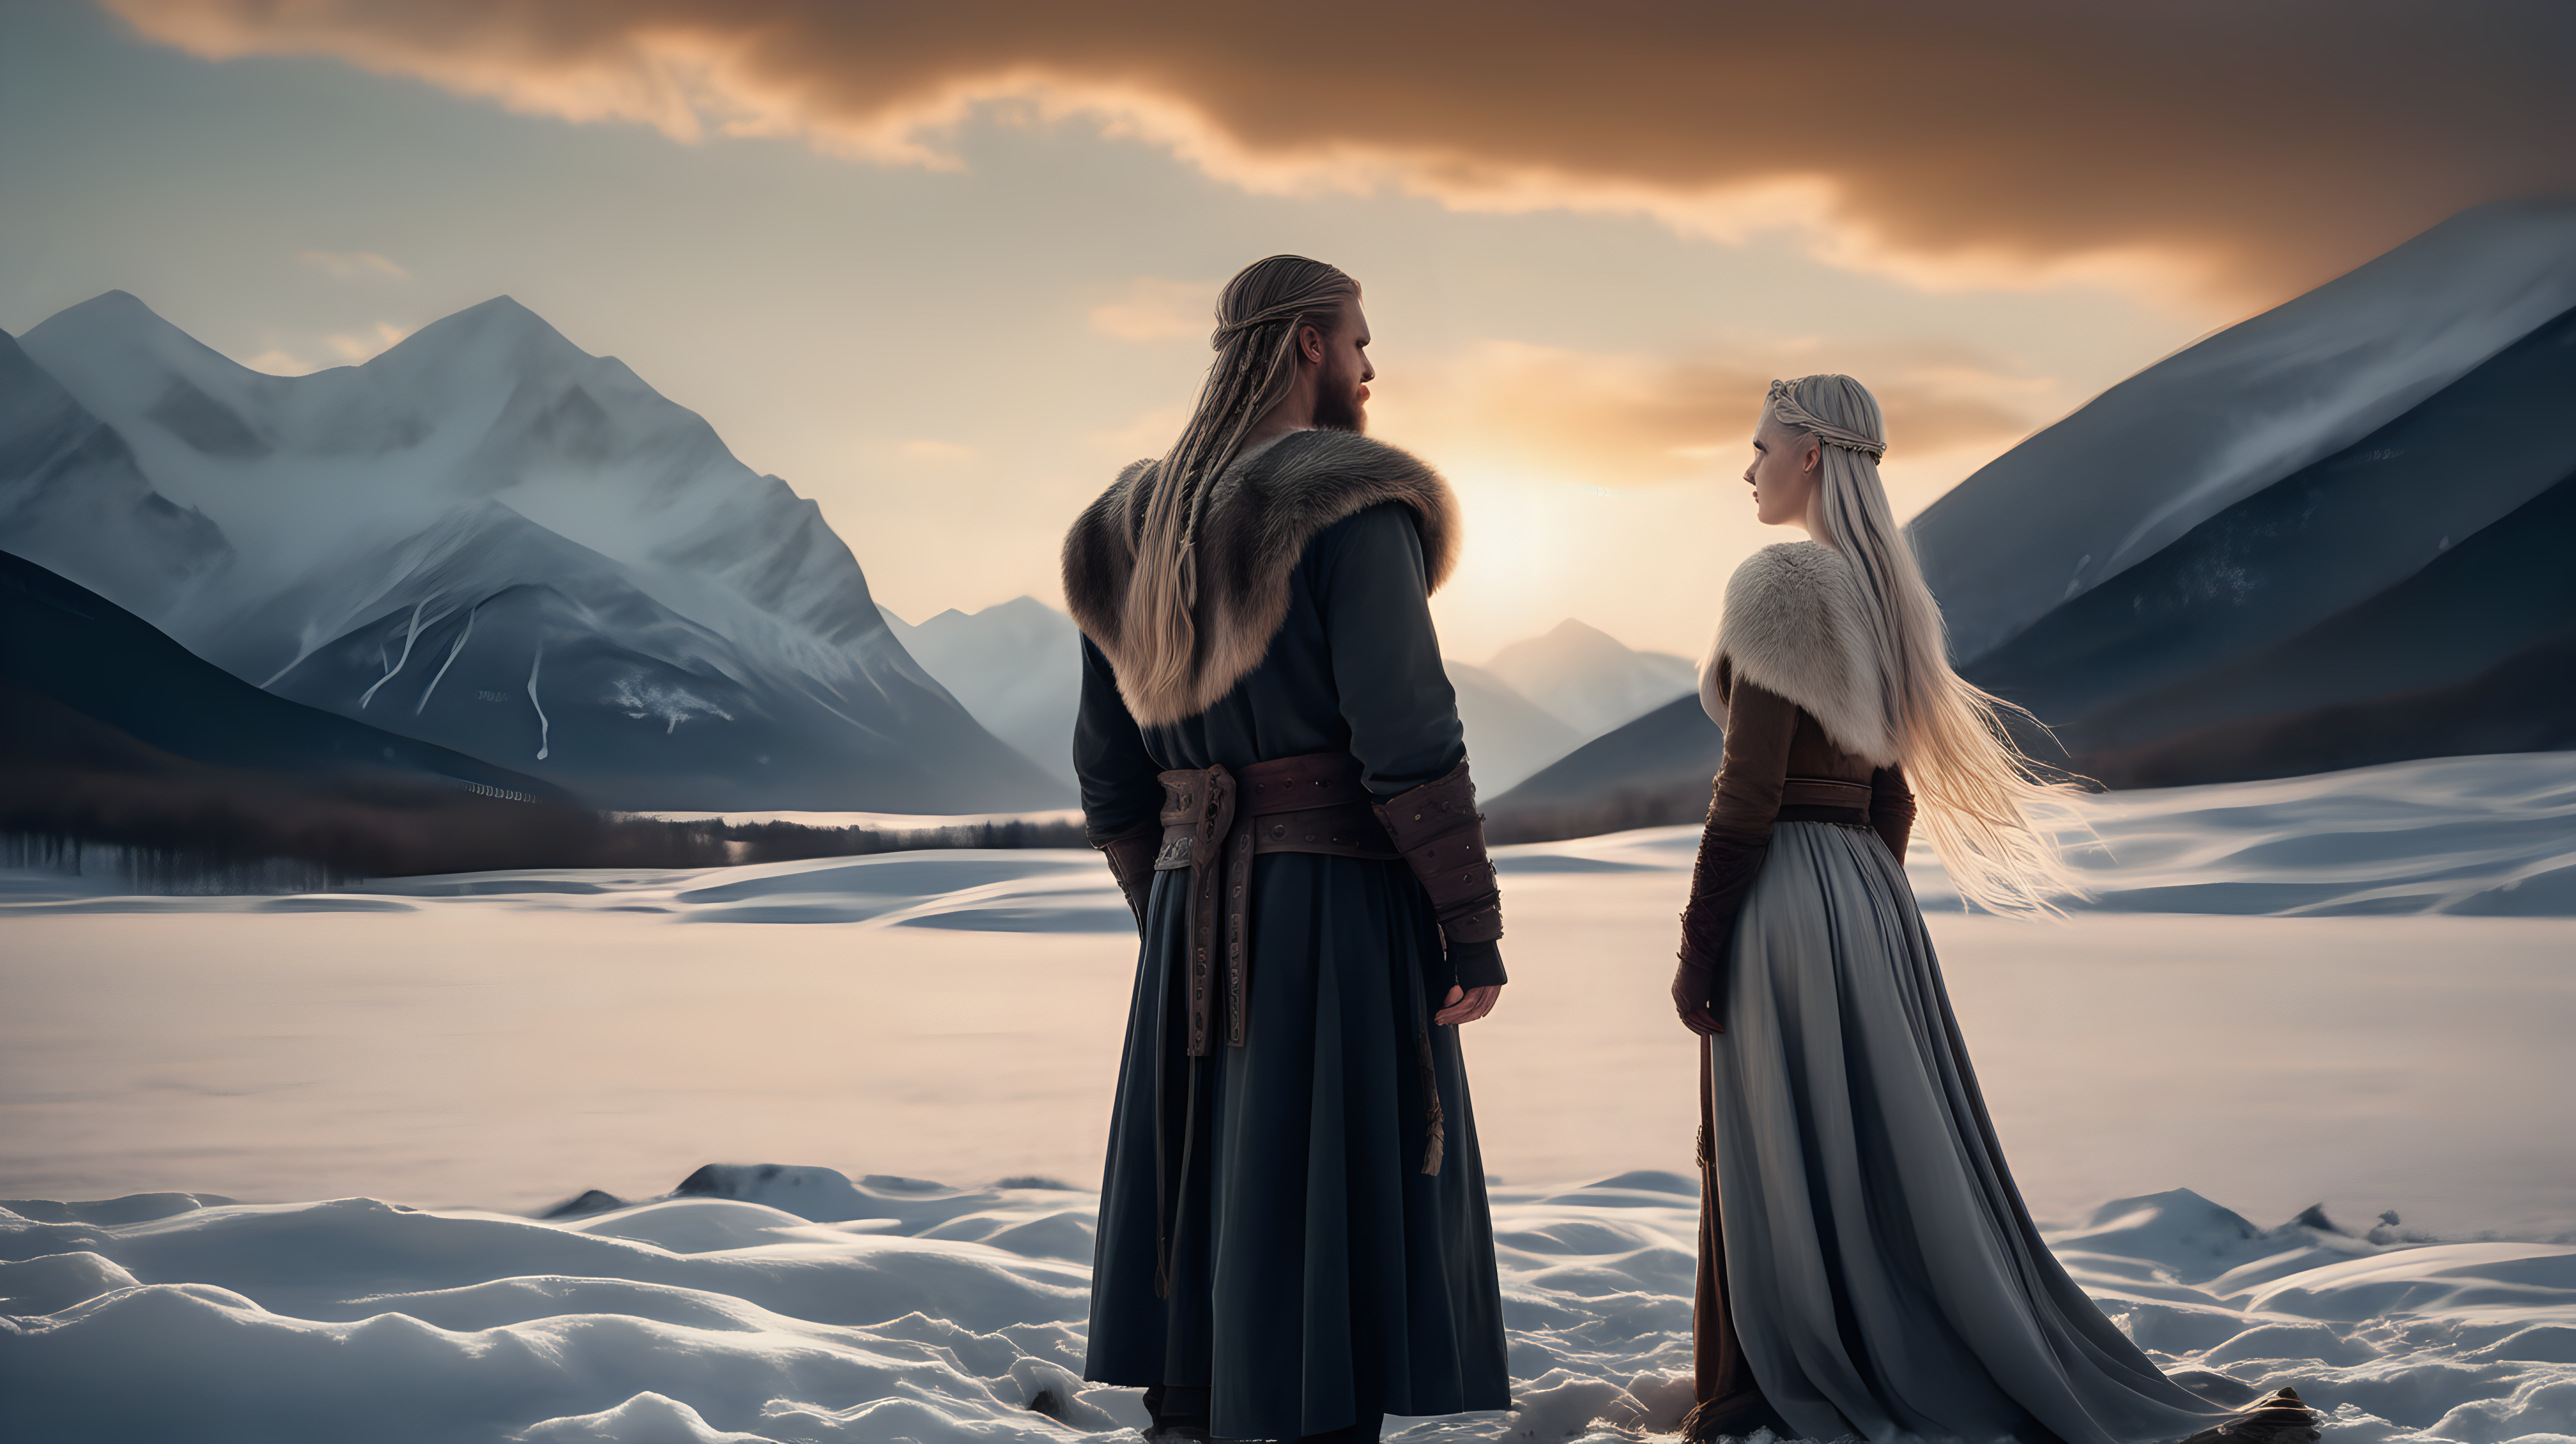 the photo is taken in snowy landscape with mountains in the distance sunset. one beauty woman is standing, a man is on her side. both are watching to the mountains. The photo was take from behind them. The woman is wearing viking indumentary, without weapons, white straight hair. The man wear viking indumentary too. The lighting in the portrait should be dramatic. Sharp focus. A ultrarealistic perfect example of cinematic shot. Use muted colors to add to the scene. Only one woman and one man